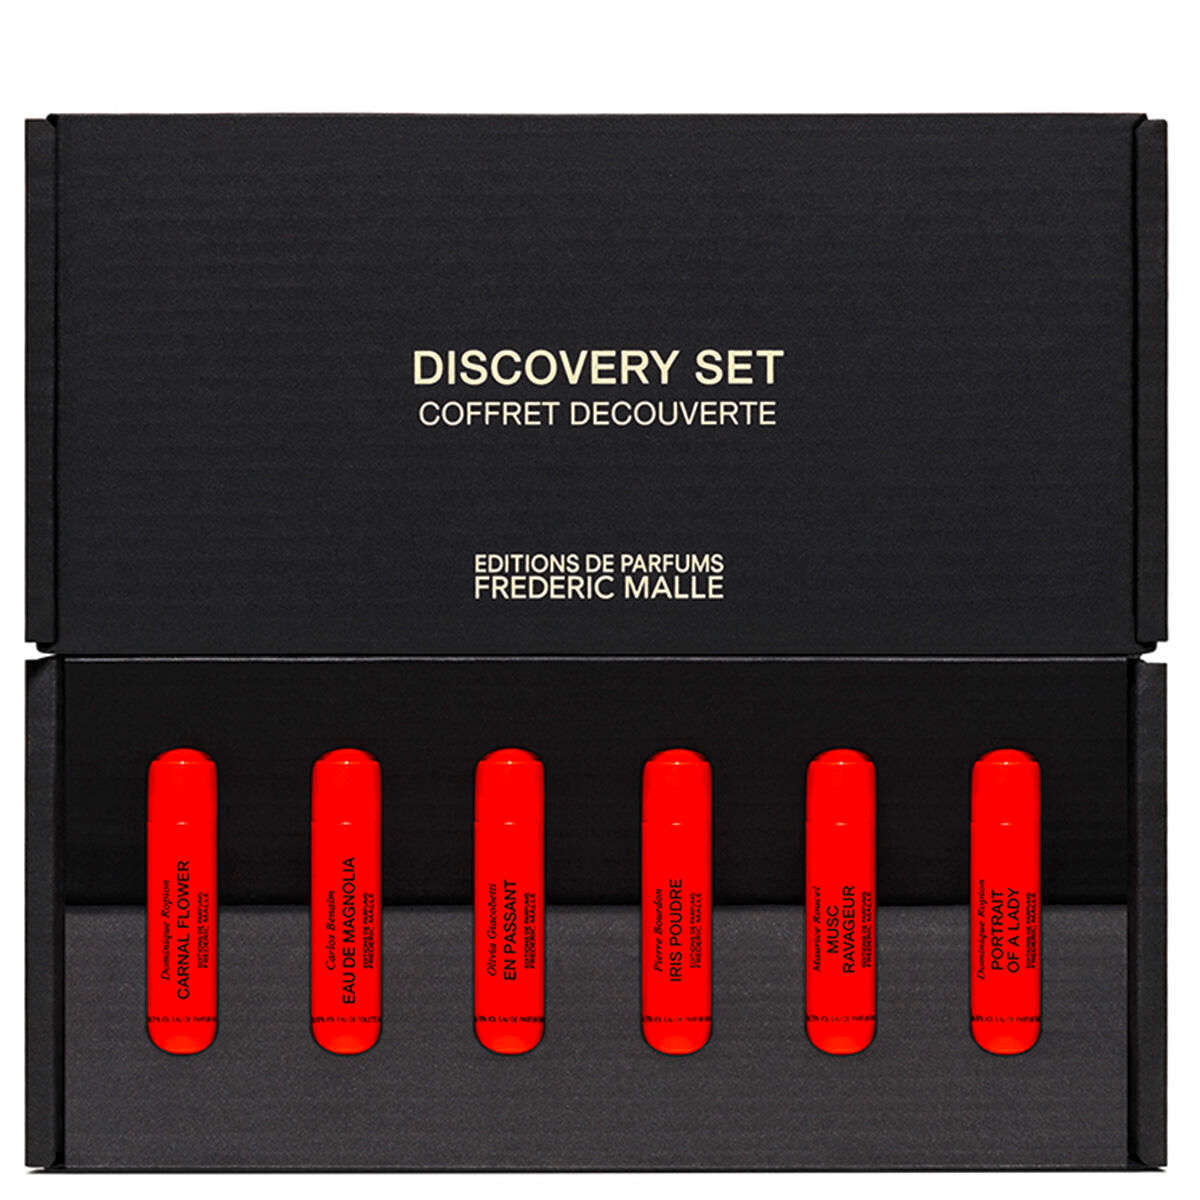 EDITIONS DE PARFUMS FREDERIC MALLE DISCOVERY SET WOMEN 6 x 1,2 ml